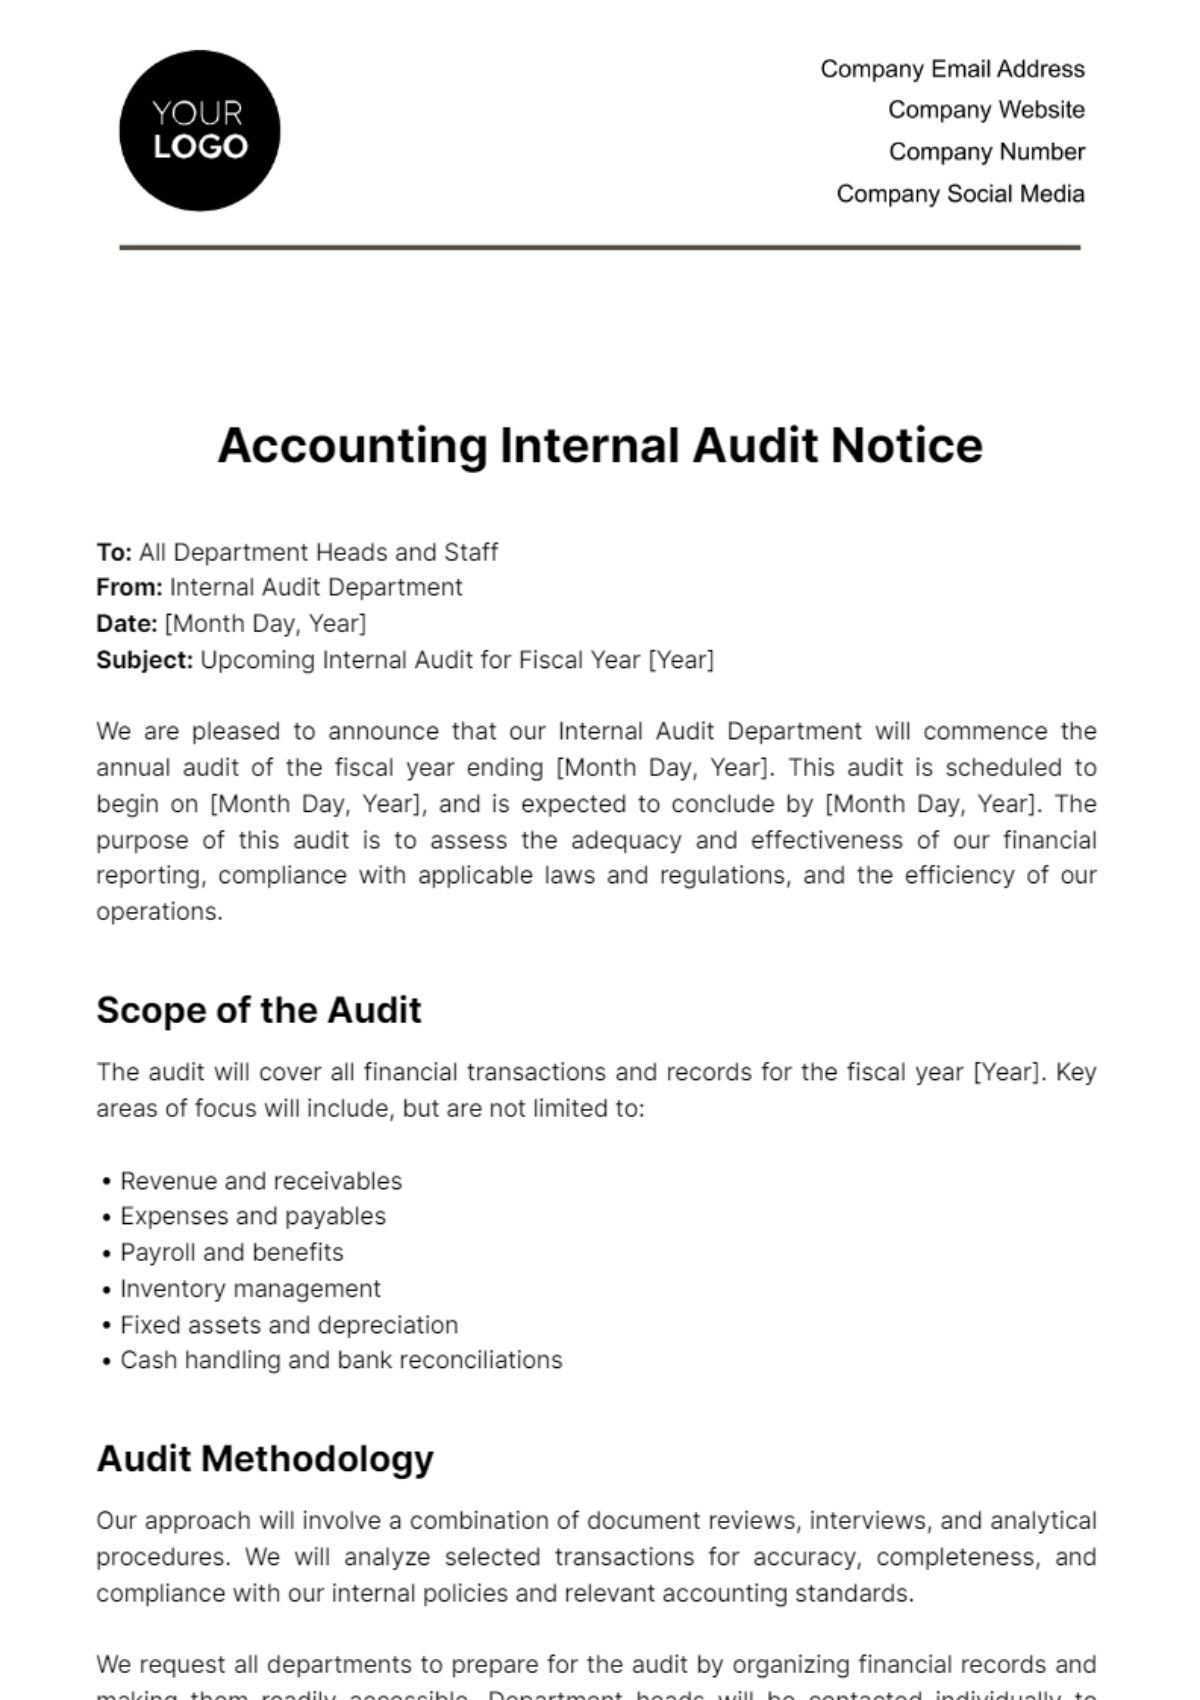 Accounting Internal Audit Notice Template